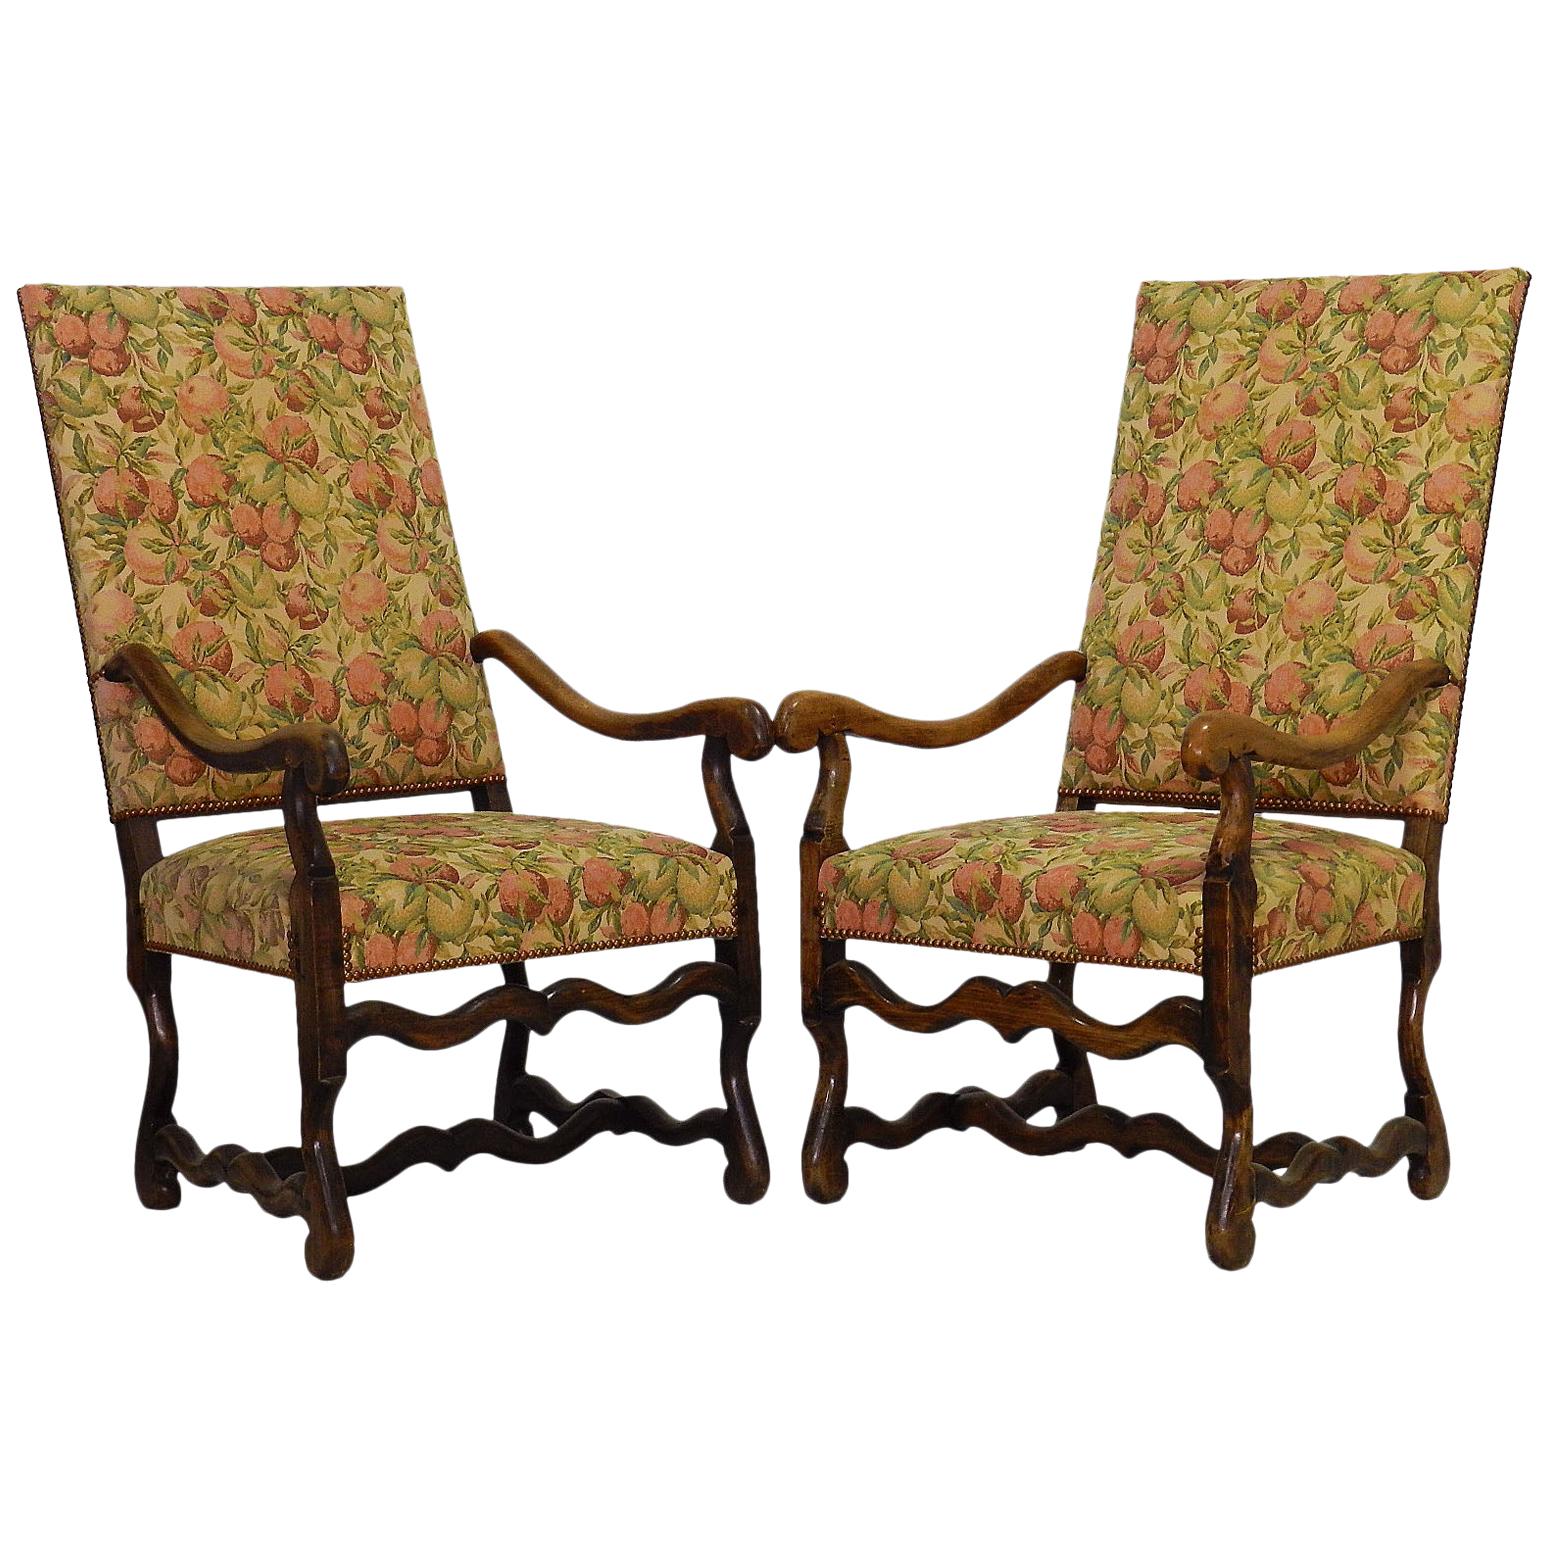 Pair of Os de Mouton Open Armchairs French 19th Century Throne Chairs Walnut